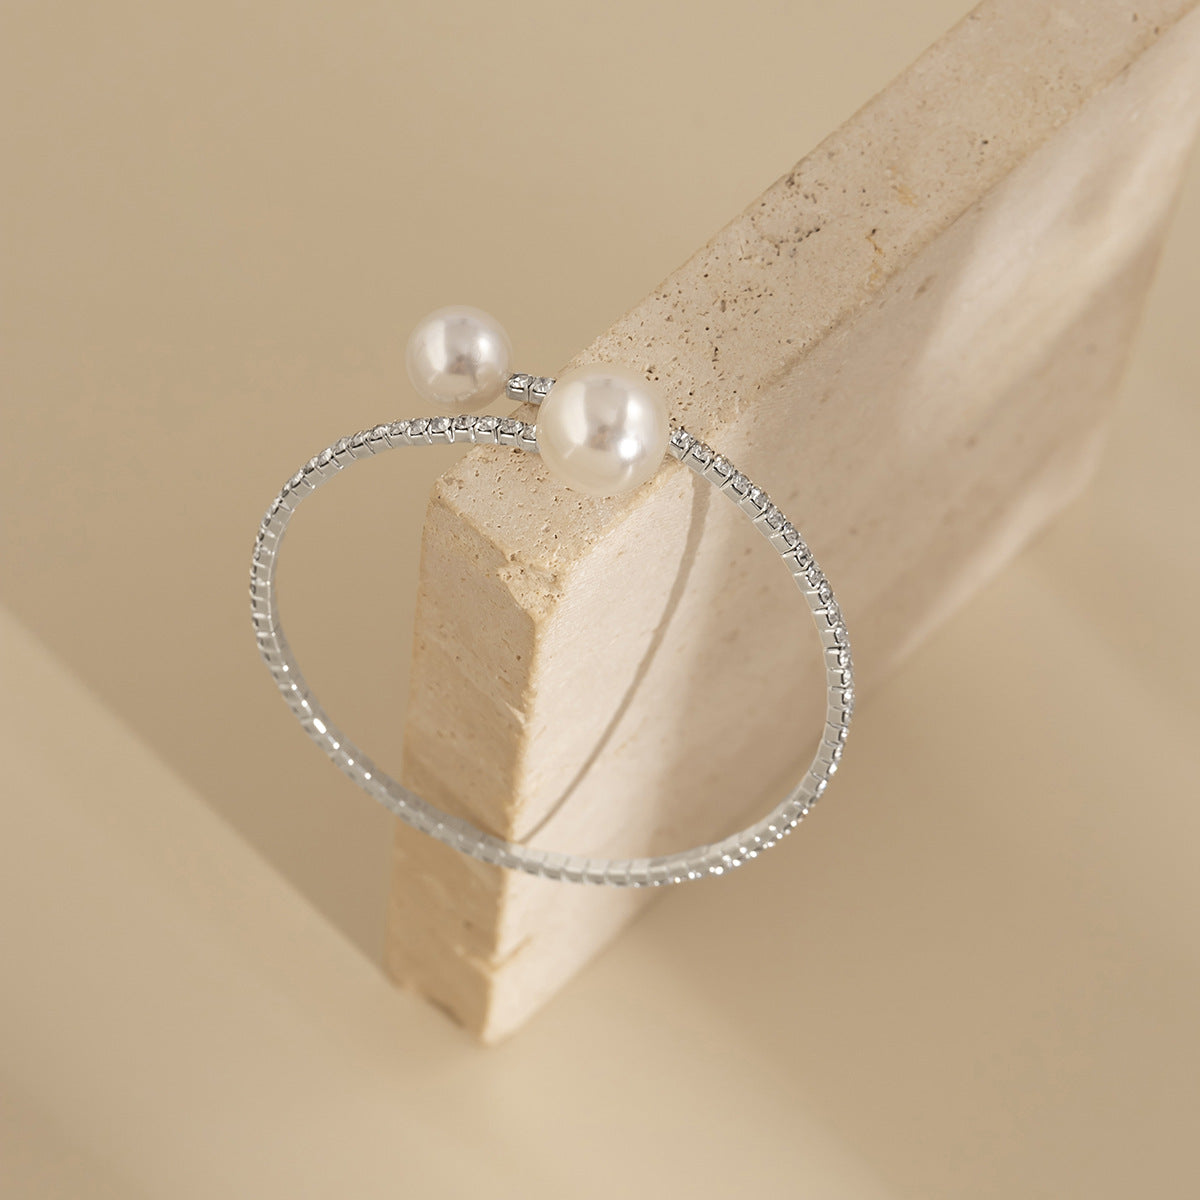 Symmetrical Metal Single Claw Chain Imitation Pearl Bracelet with Open Full Drill Europe and The United States Cross-border Jewelry.